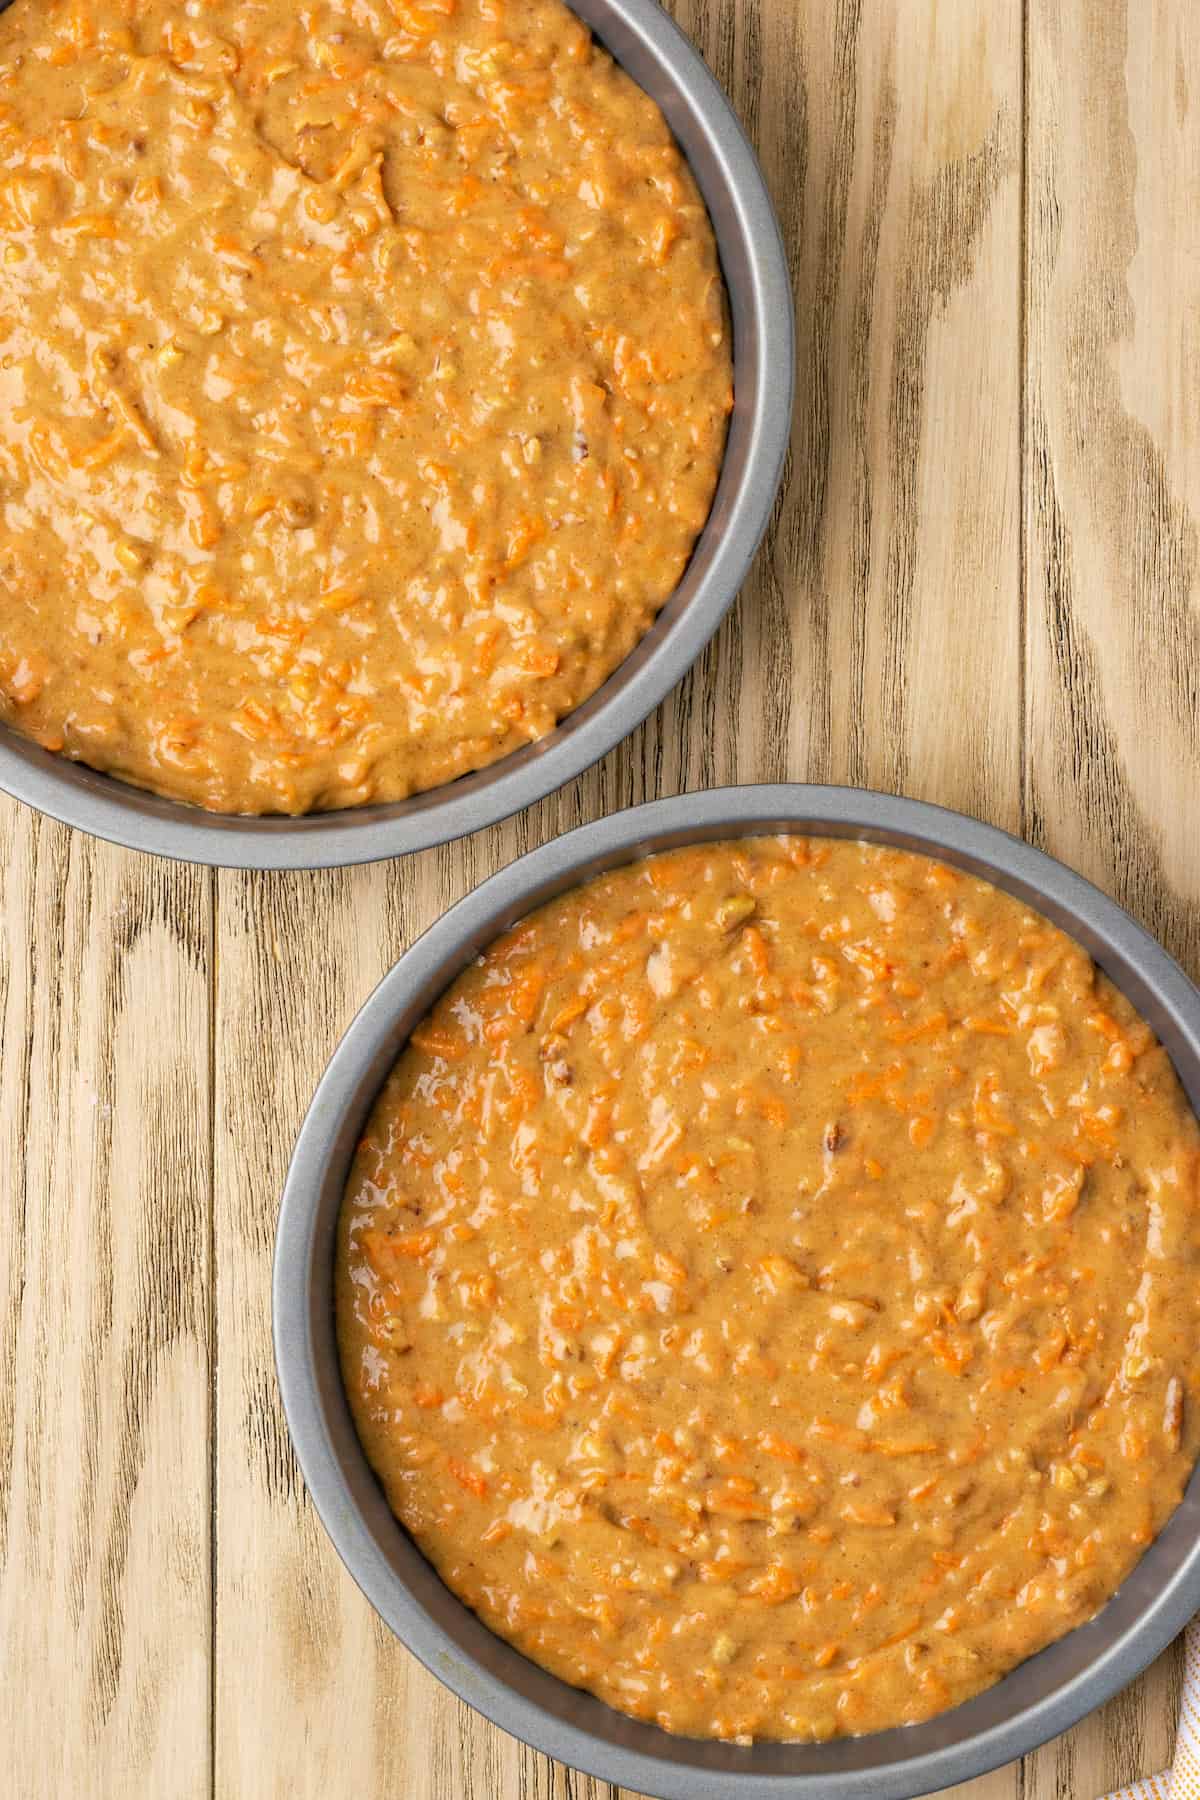 Gluten-free carrot cake batter divided between two round cake pans.